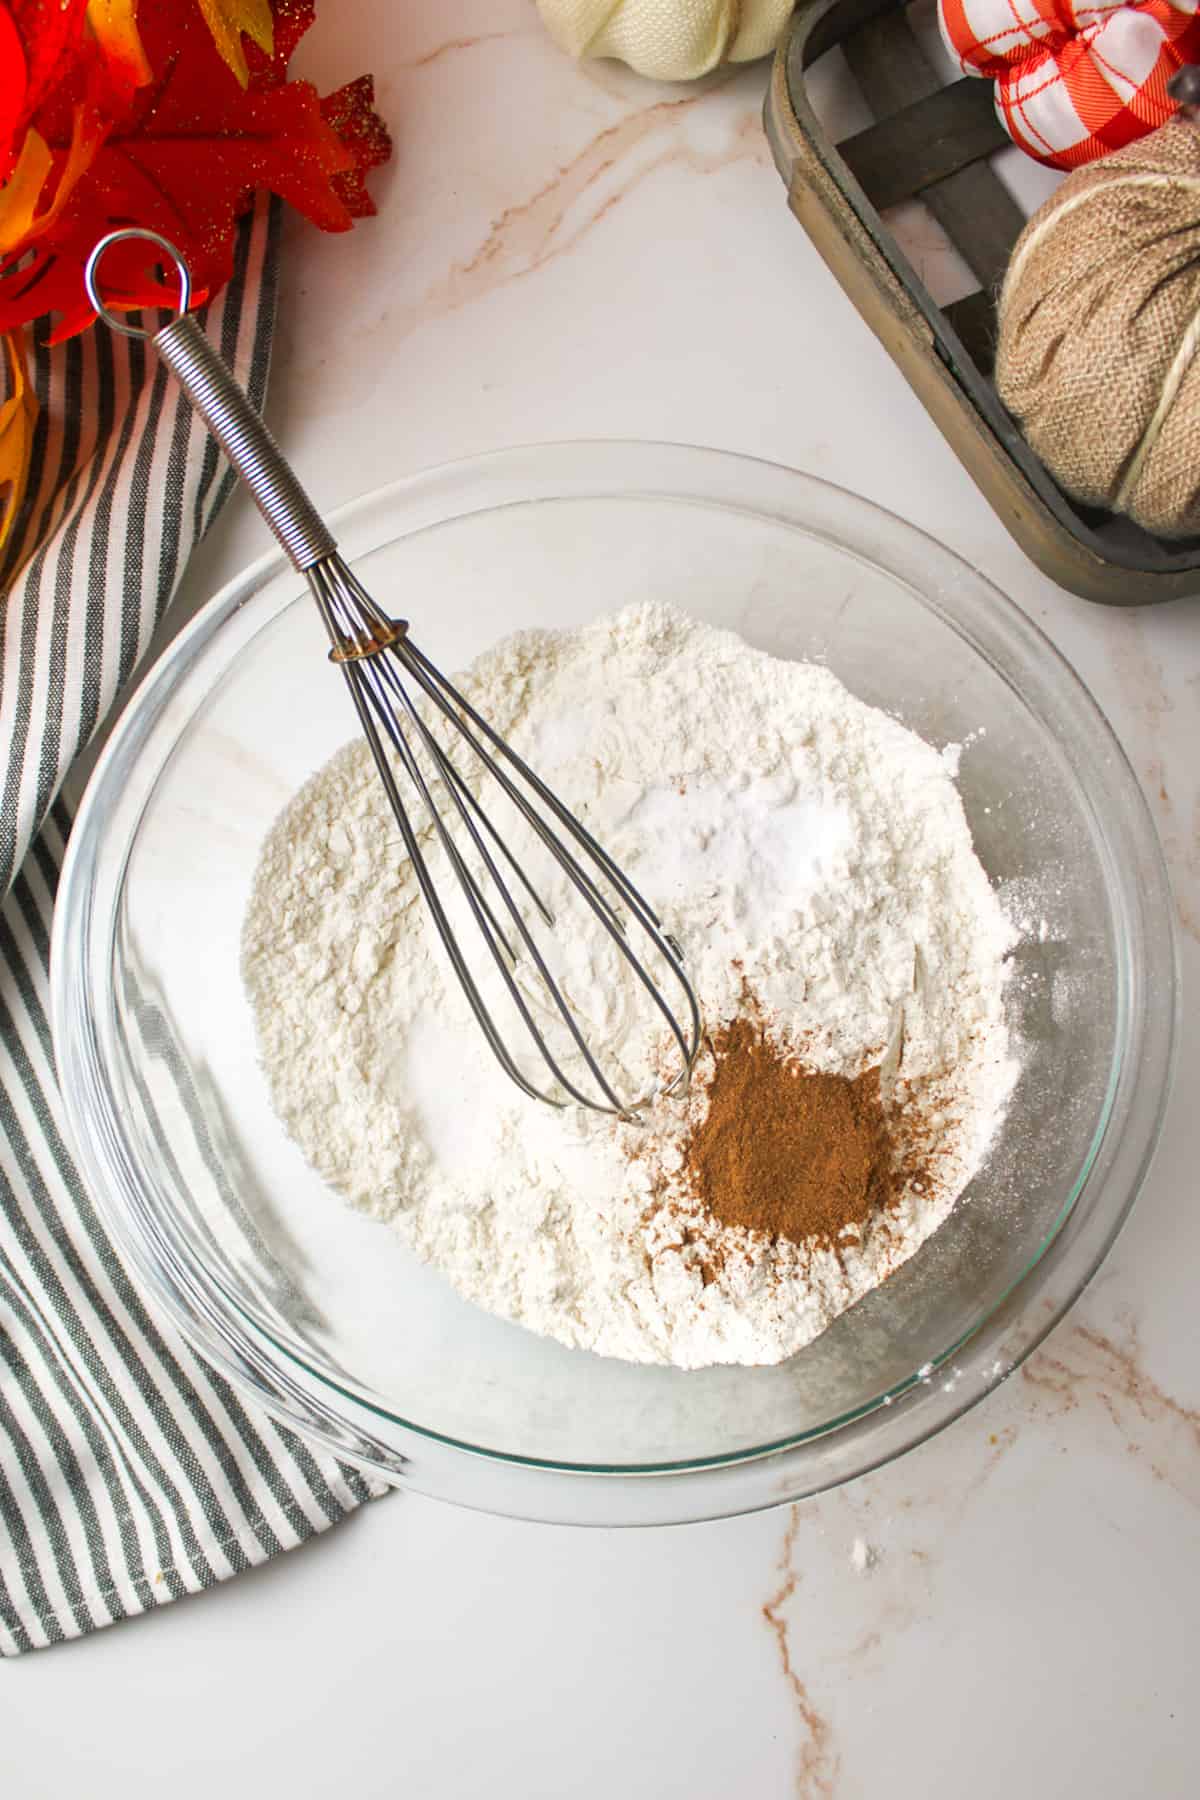 dry ingredients for cookies in a mixing bowl with a whisk